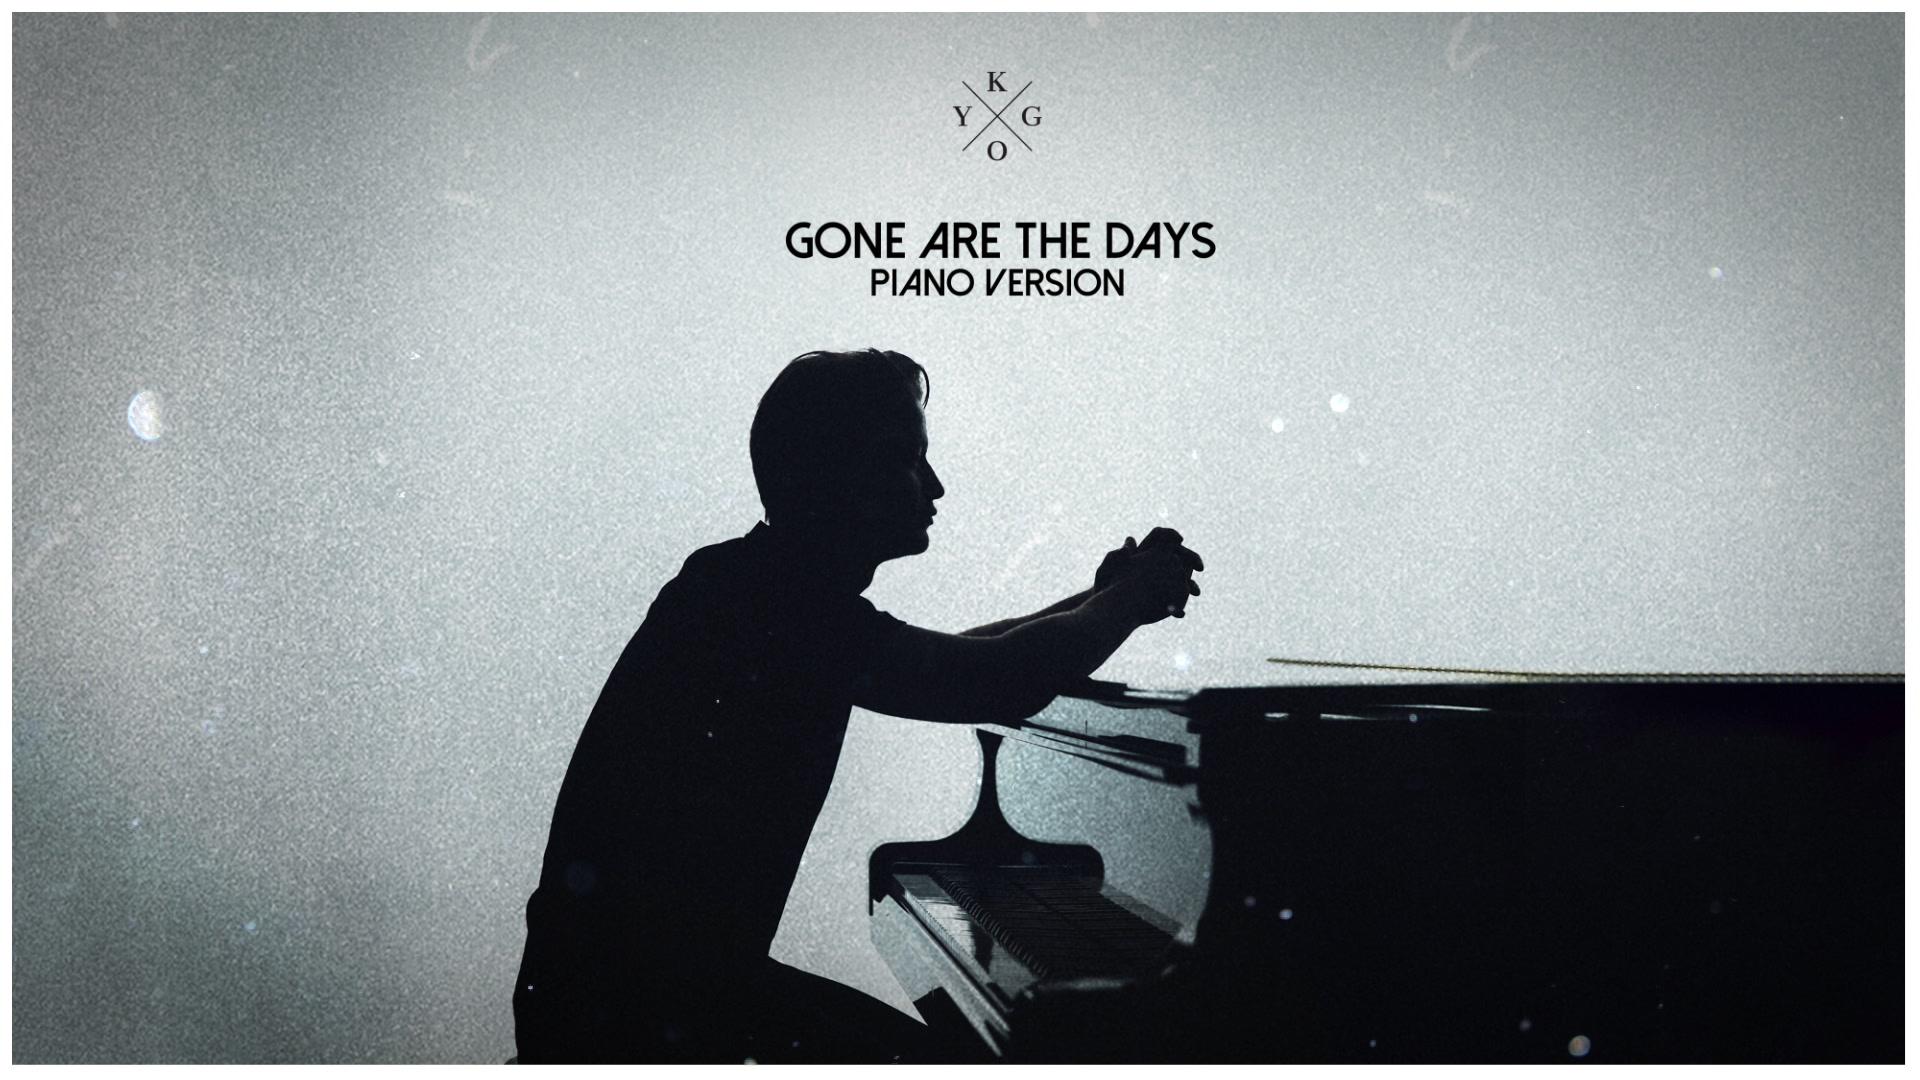 Kygo - Gone Are The Days - Piano Jam 4 (Visualizer)